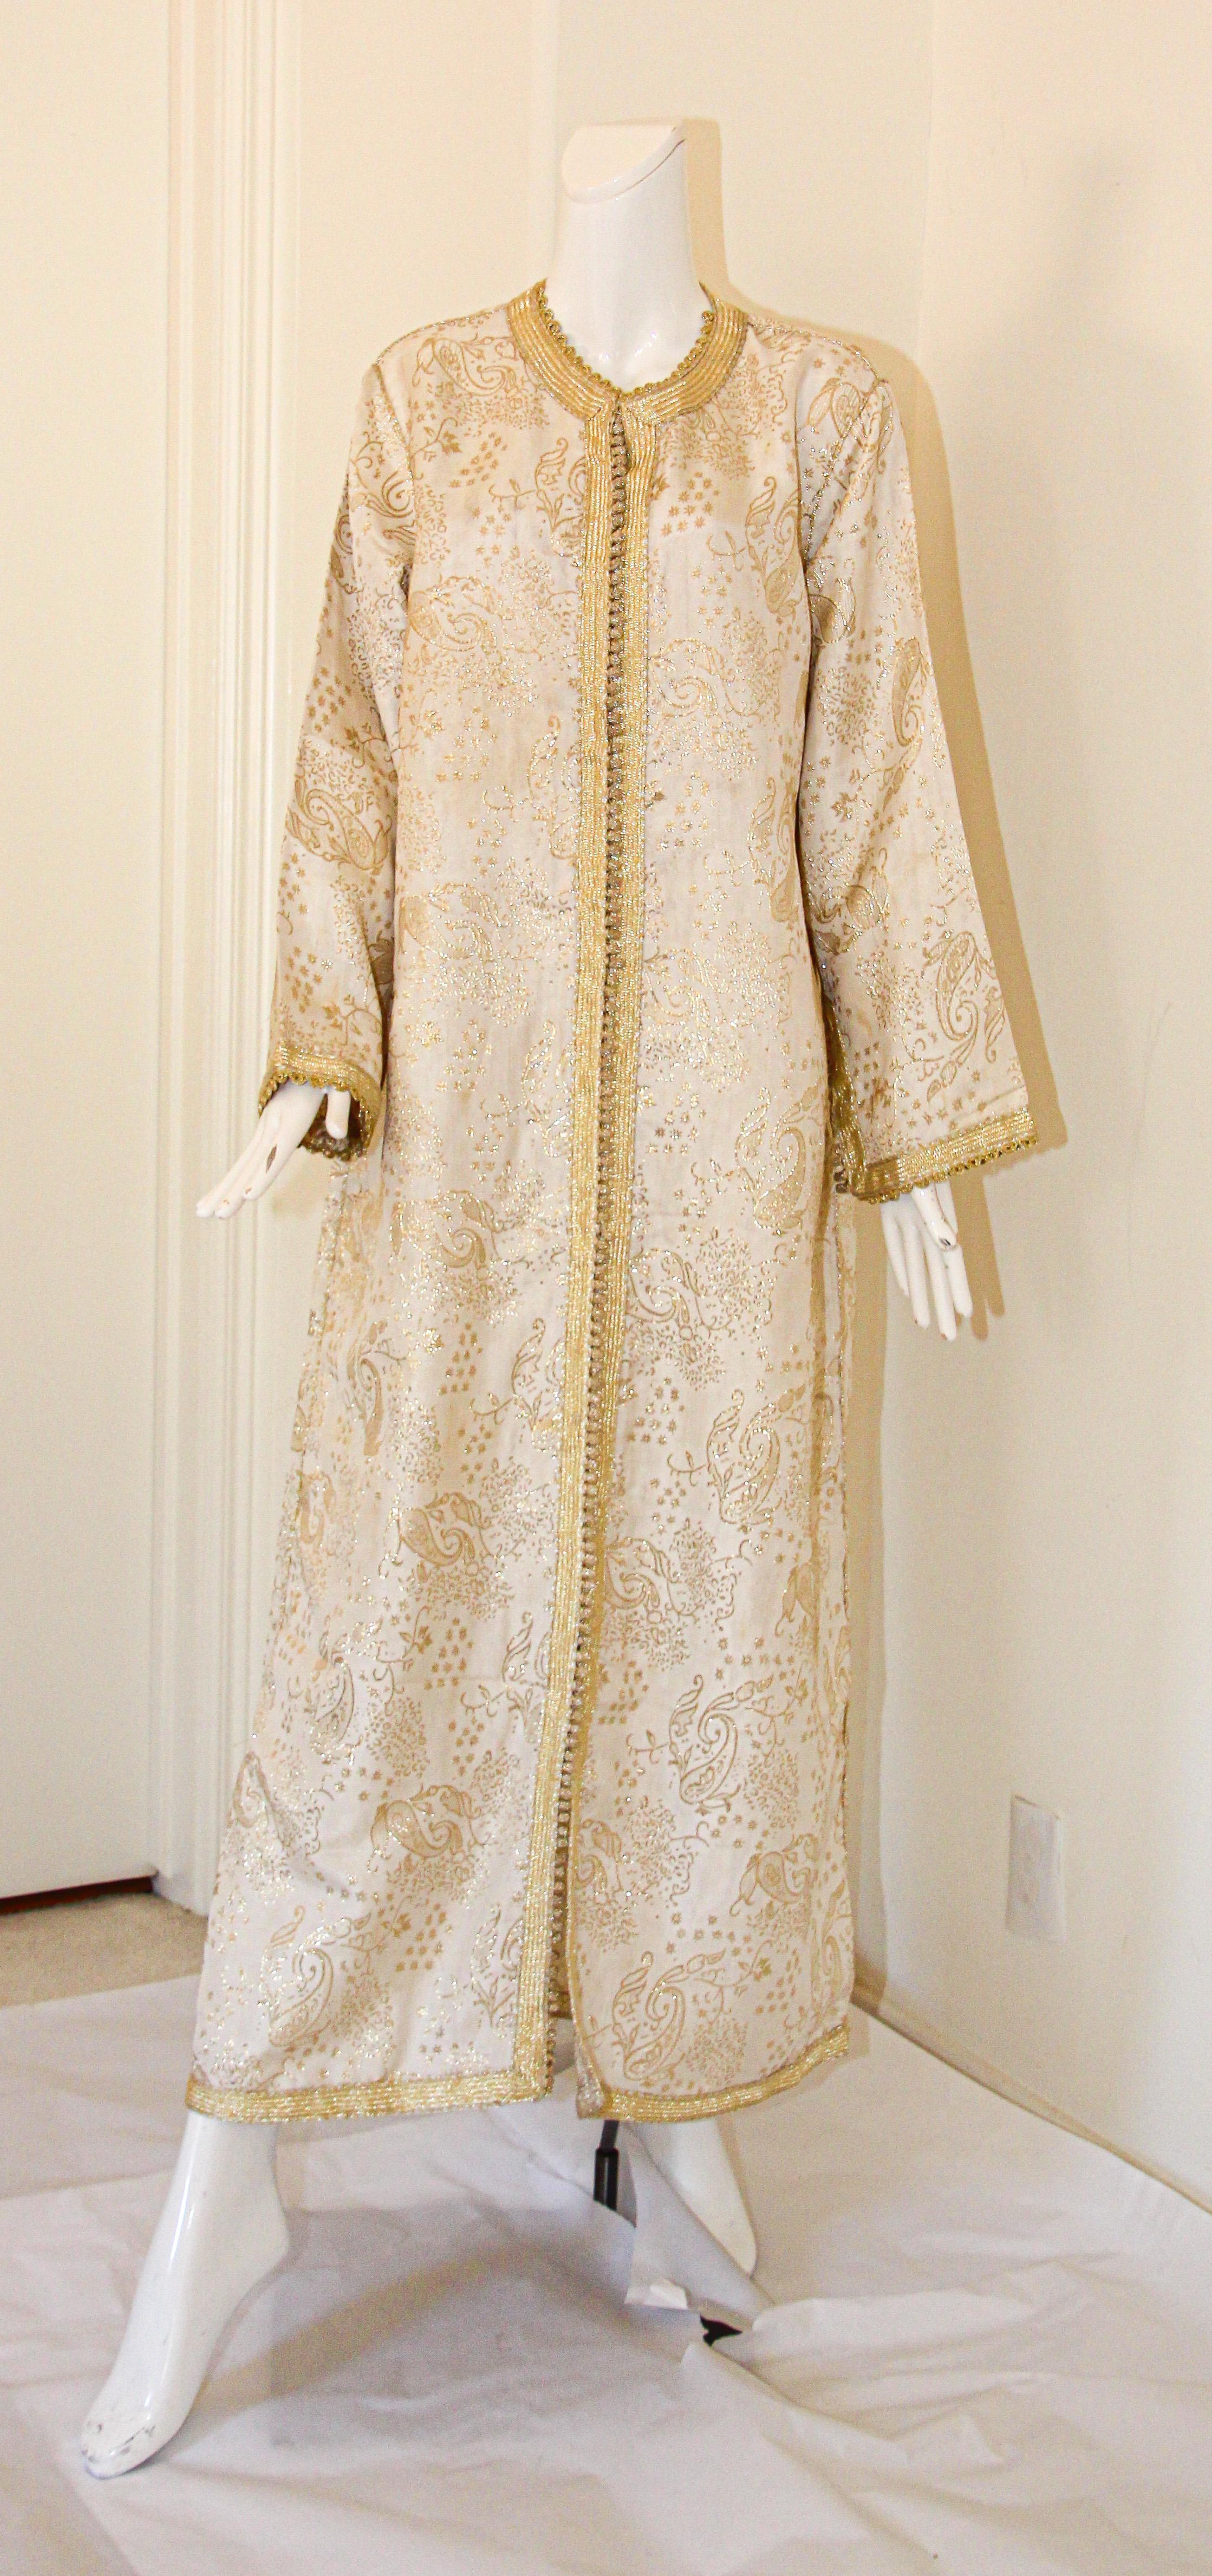 Elegant Moroccan White Caftan with Gold Metallic Floral Brocade For Sale 12